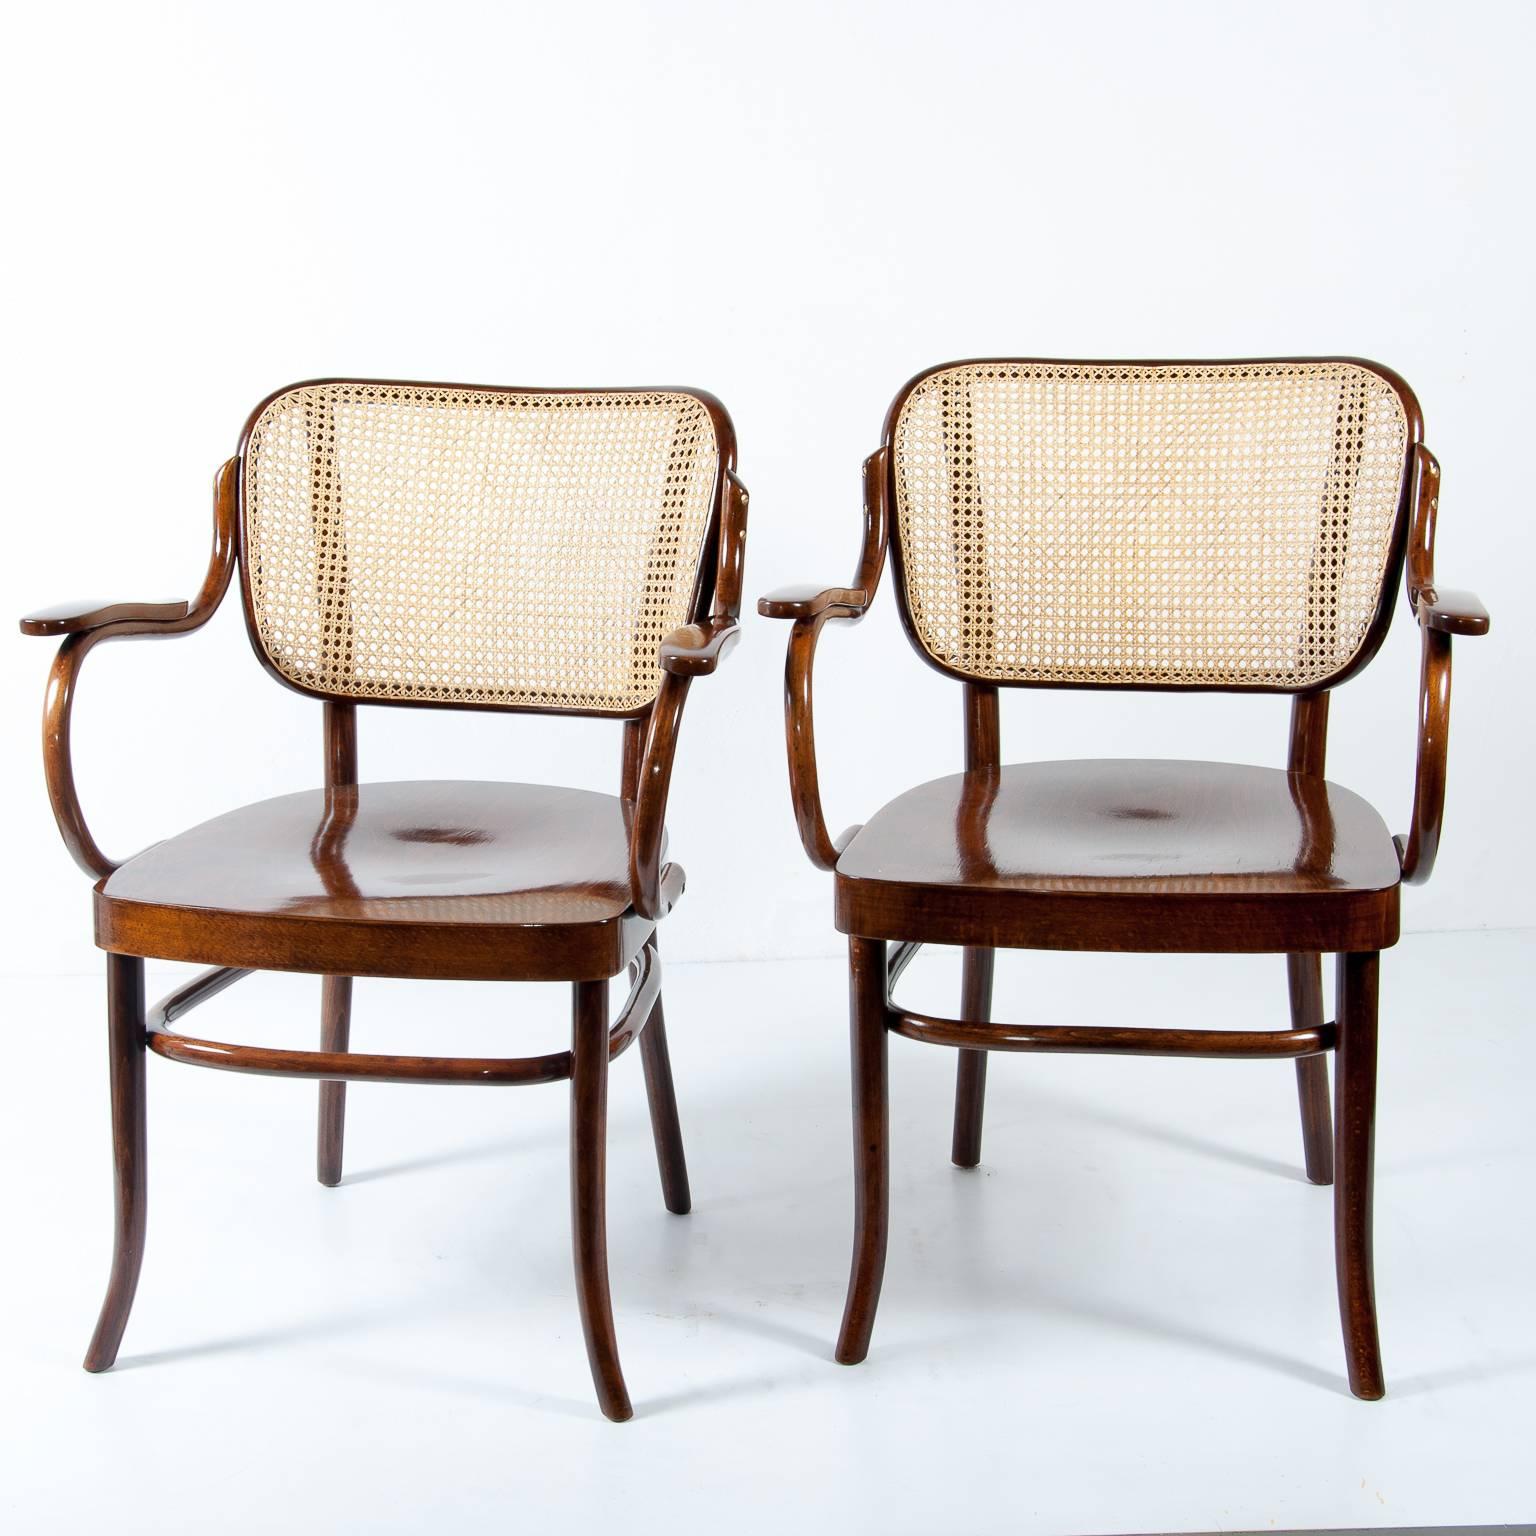 Designed by Gustav Adolf Schneck and Entwurfsbüro Thonet-Mundus Wien, before 1931.
Manufactured by Thonet, documented by label and stamp.
Beech bendwood.
Wickerwork recently renewed and surfaces polished.
Perfect condition.
Beautiful armchairs with